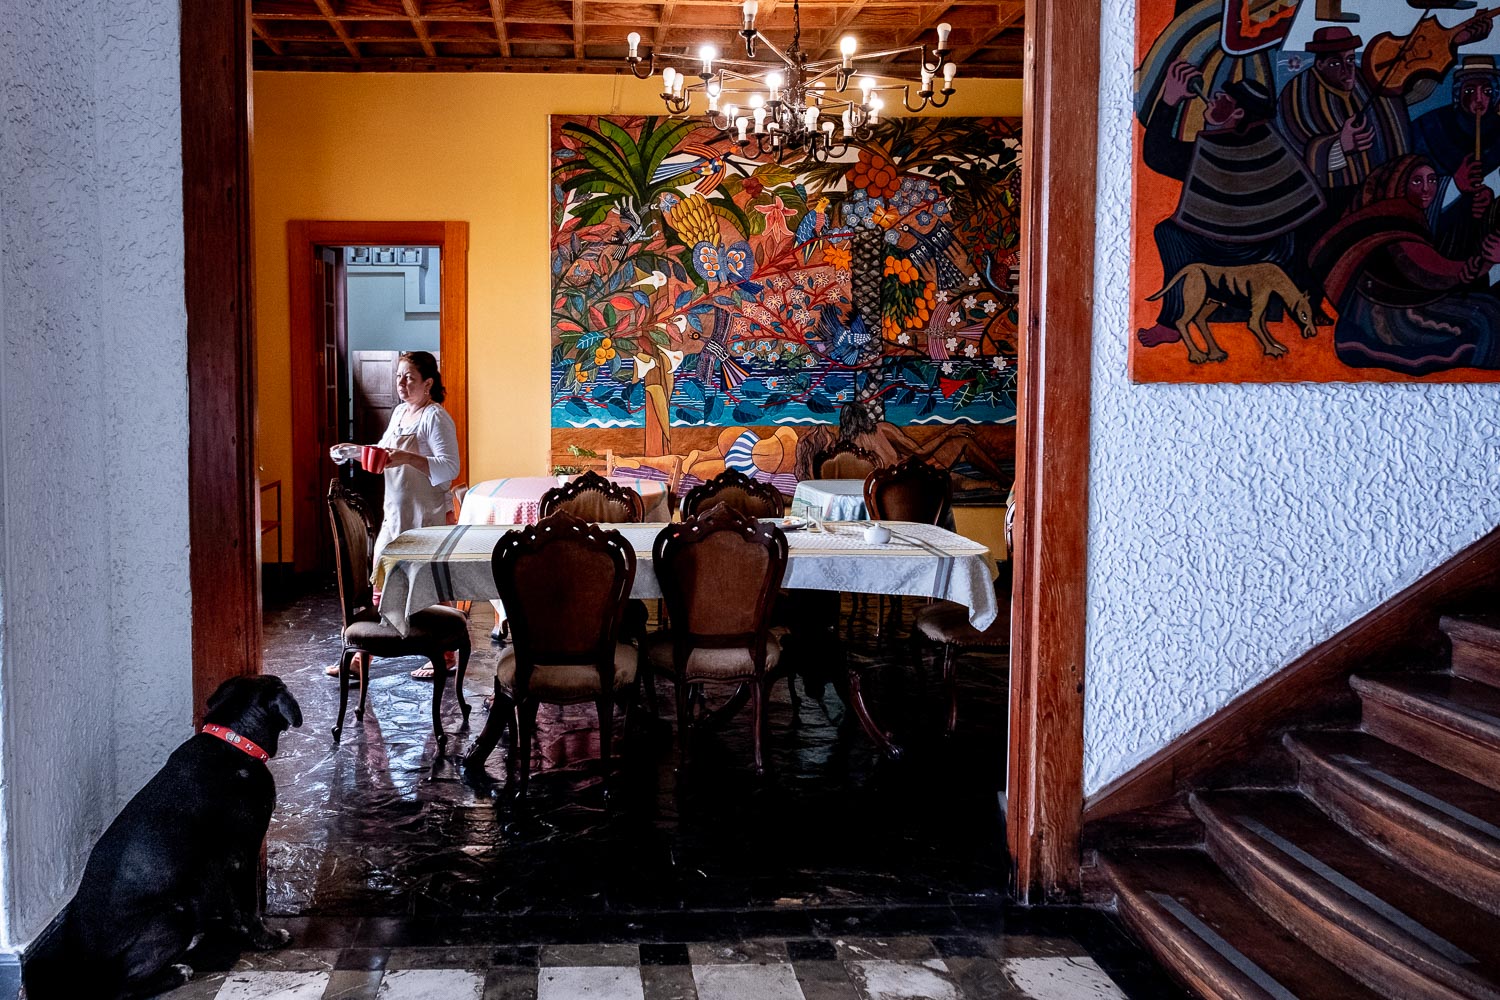 Breakfast at Second Home Peru in Lima. Travel photography and guide by © Natasha Lequepeys for "And Then I Met Yoko". #photoblog #travelblog #travelperu